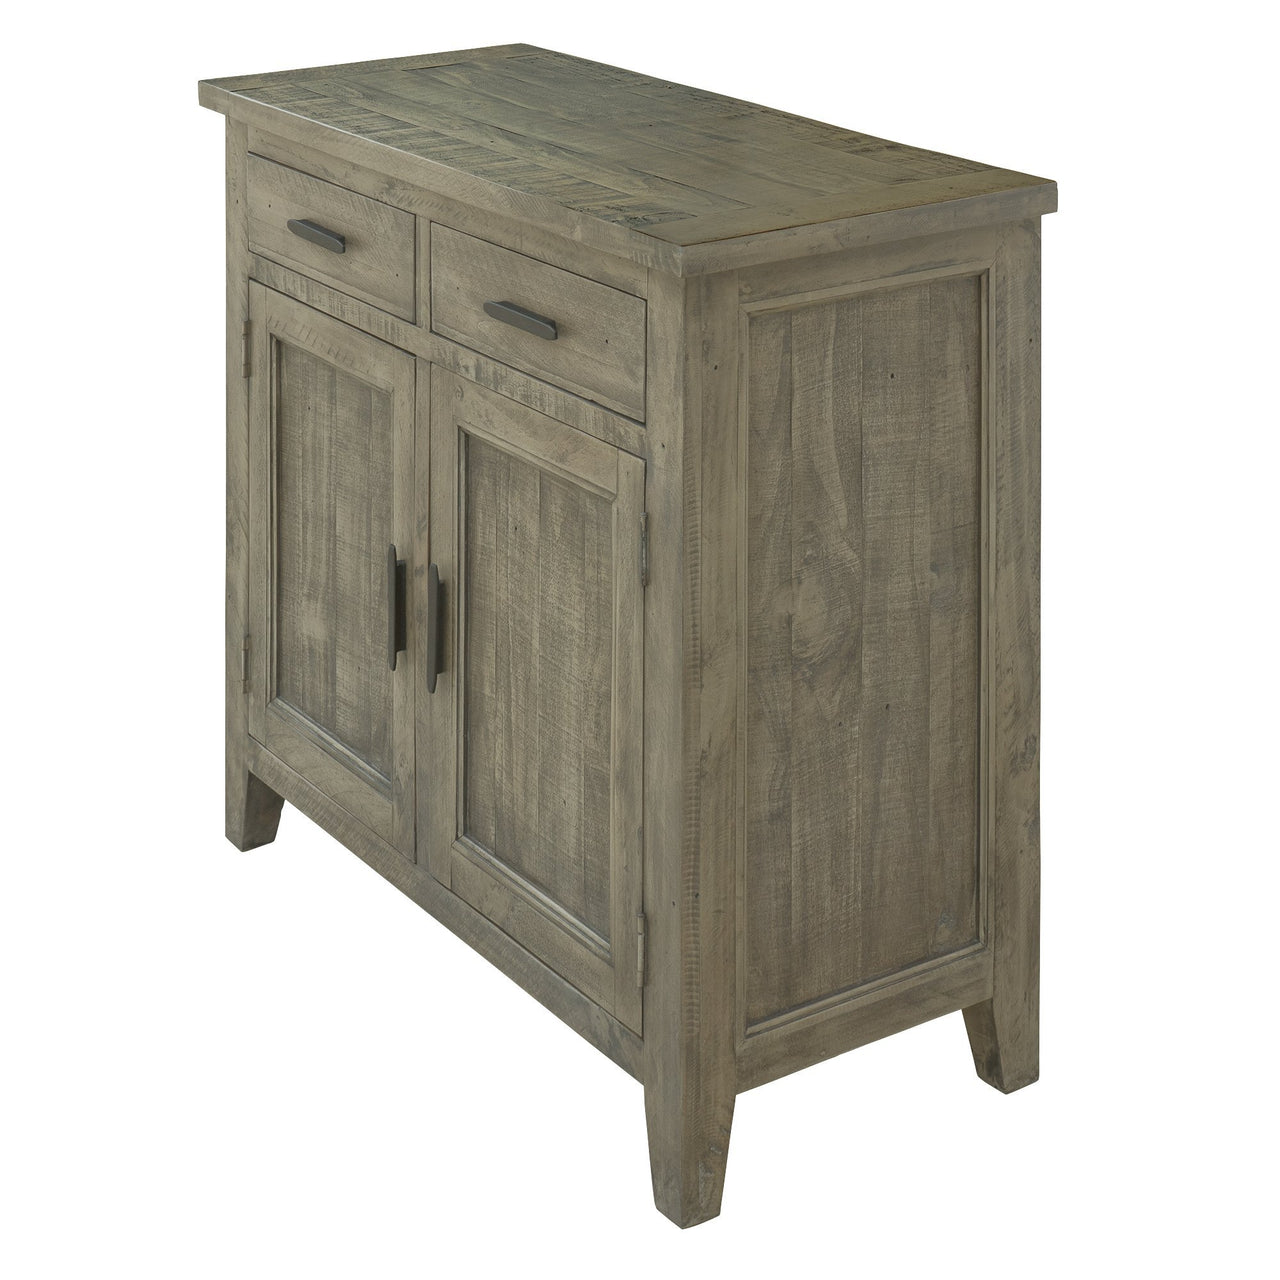 Ashford 39" Reclaimed Wood Storage Sideboard with Two Drawers and Doors Sideboard AndMakers 